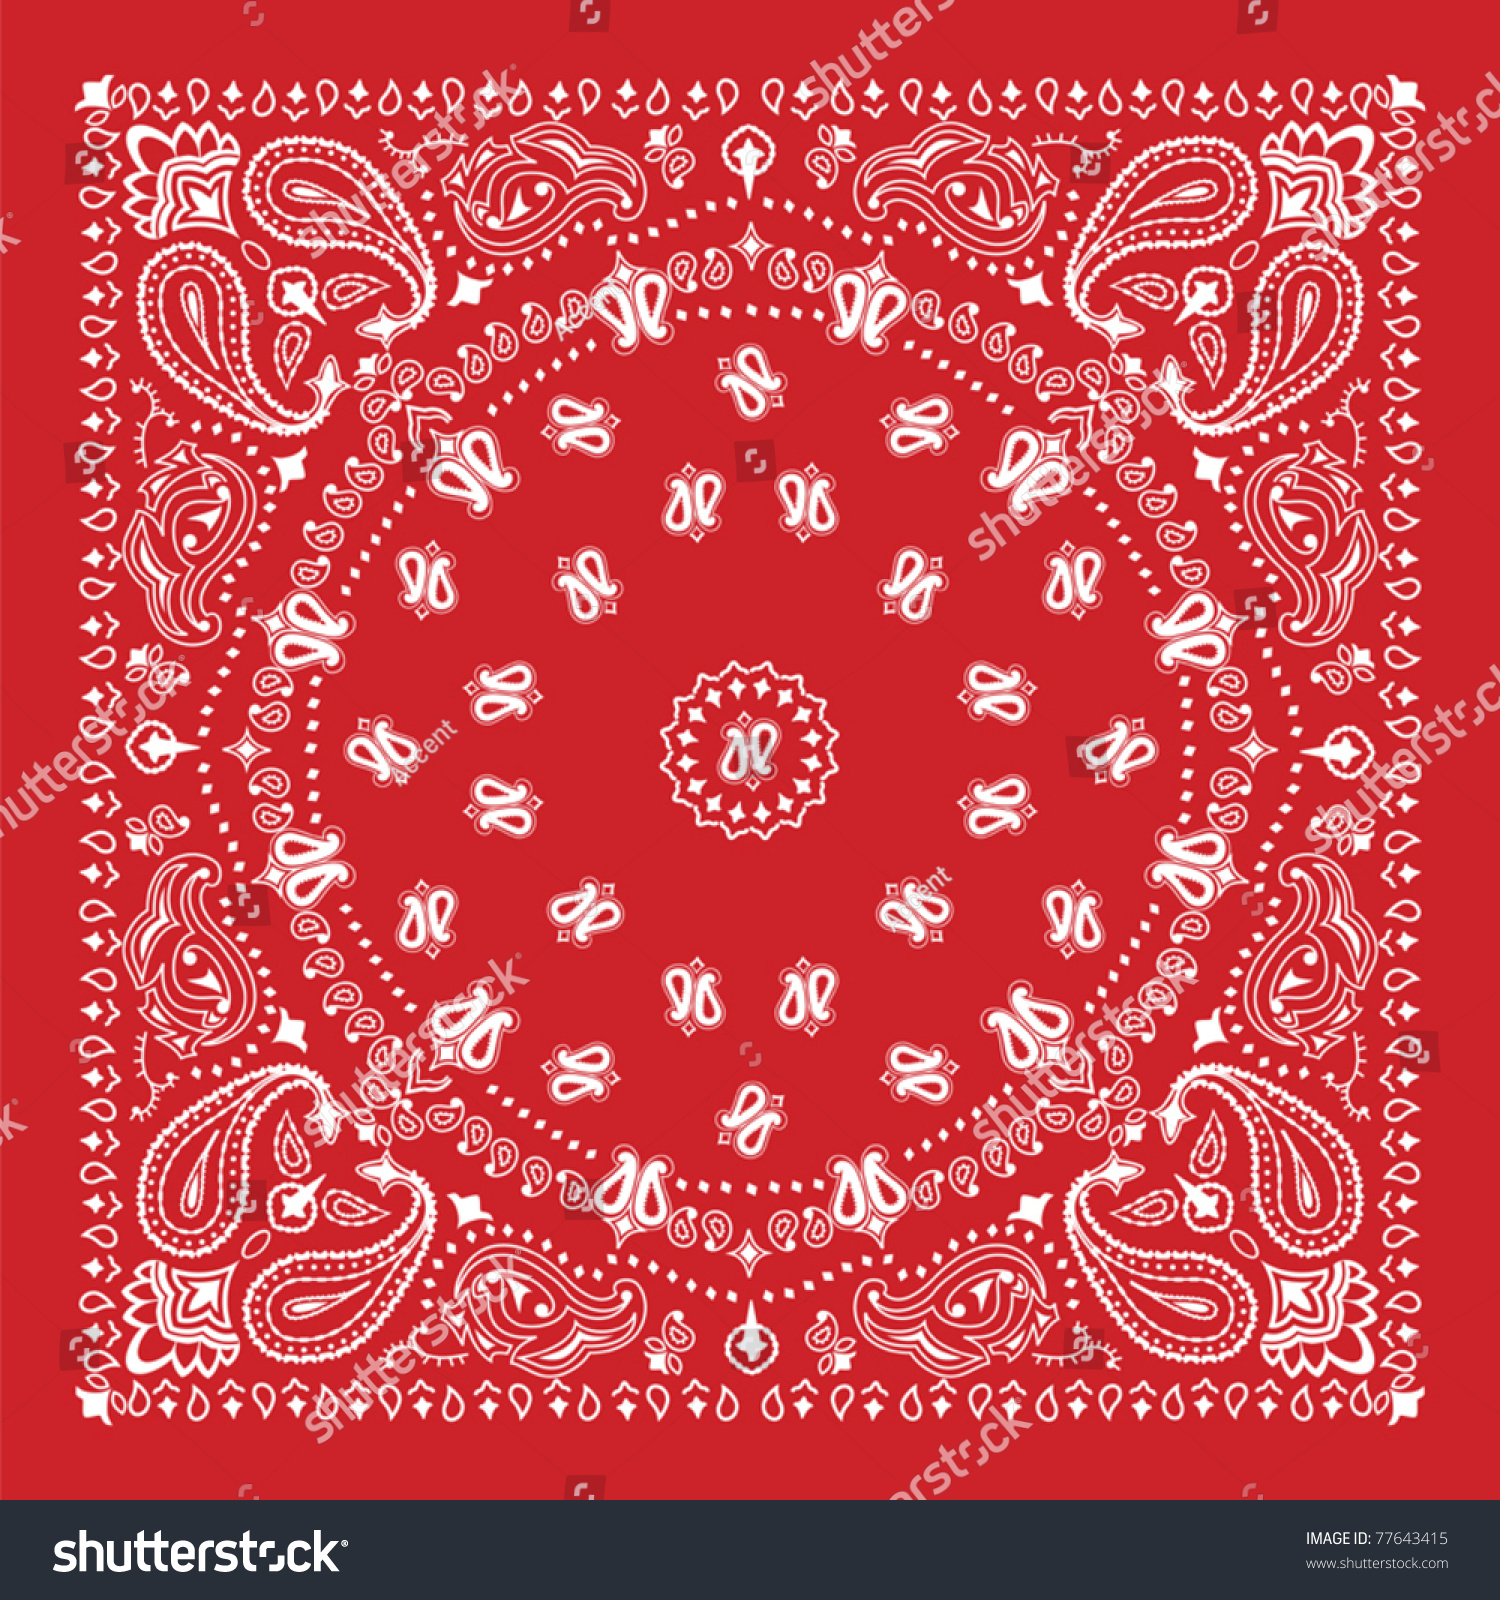 SVG of Bandana design in red and white svg